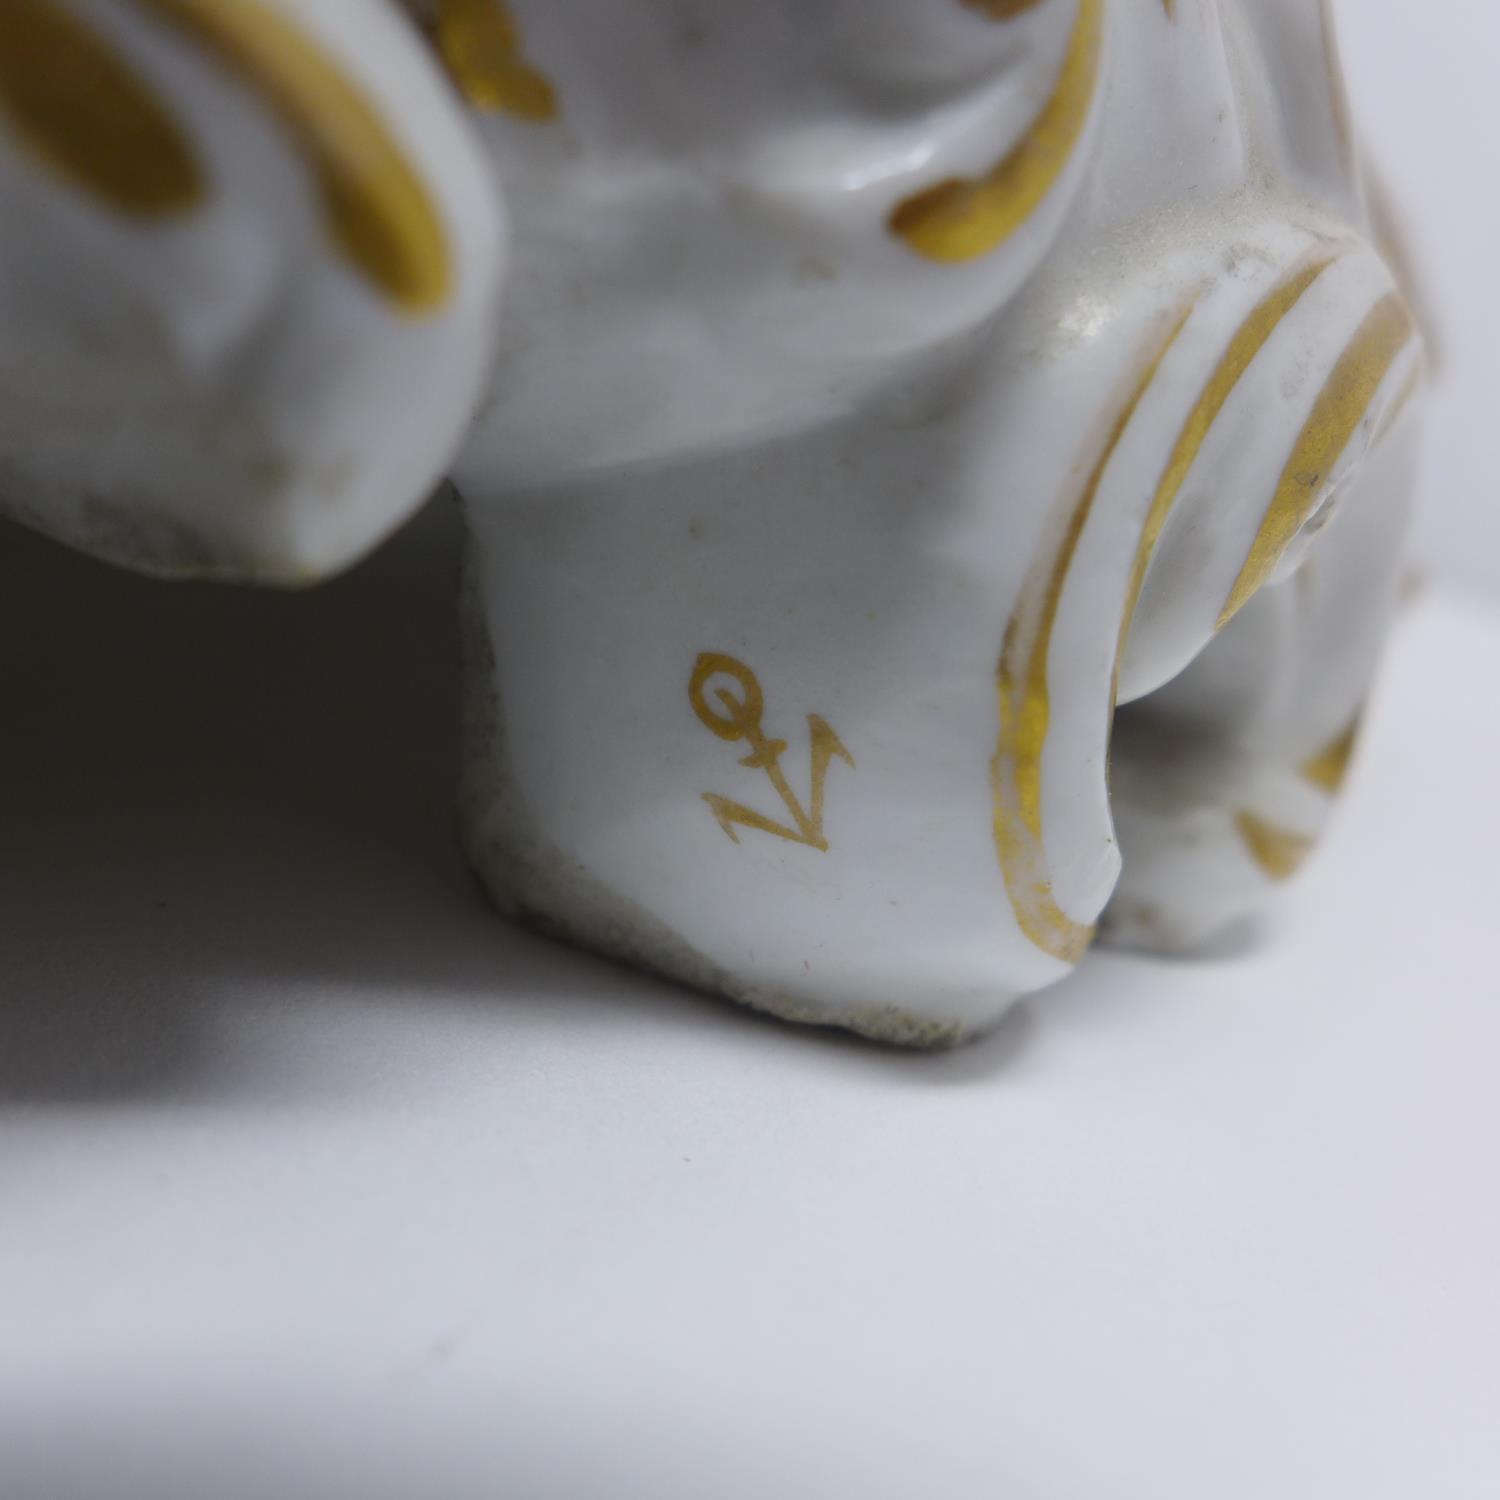 A late 18th/early 19th century Chelsea porcelain figural group, with gold anchor mark to verso, - Image 11 of 11